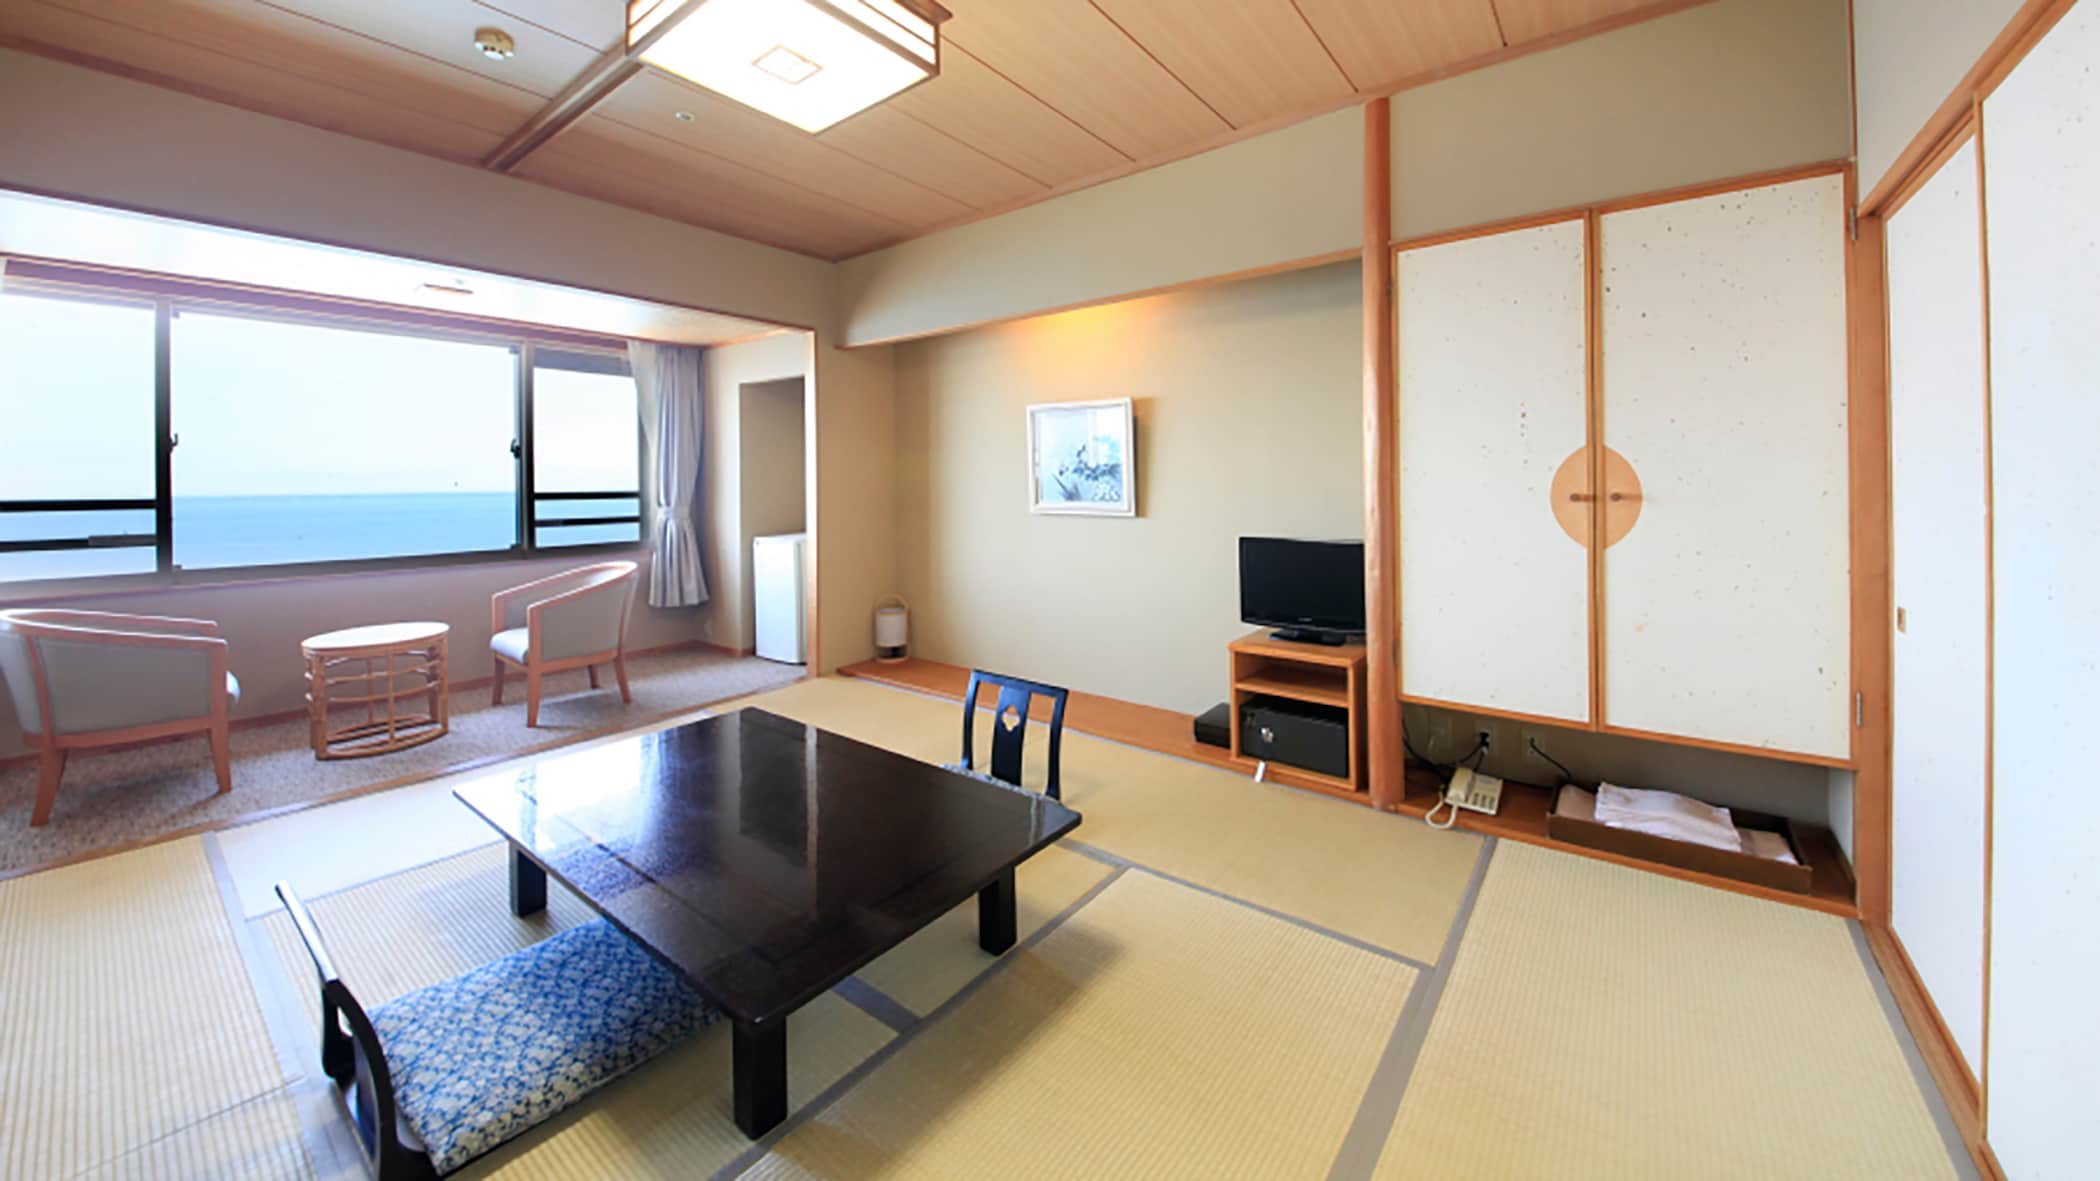 [Guest room] Japanese-style room on the sea side (example)